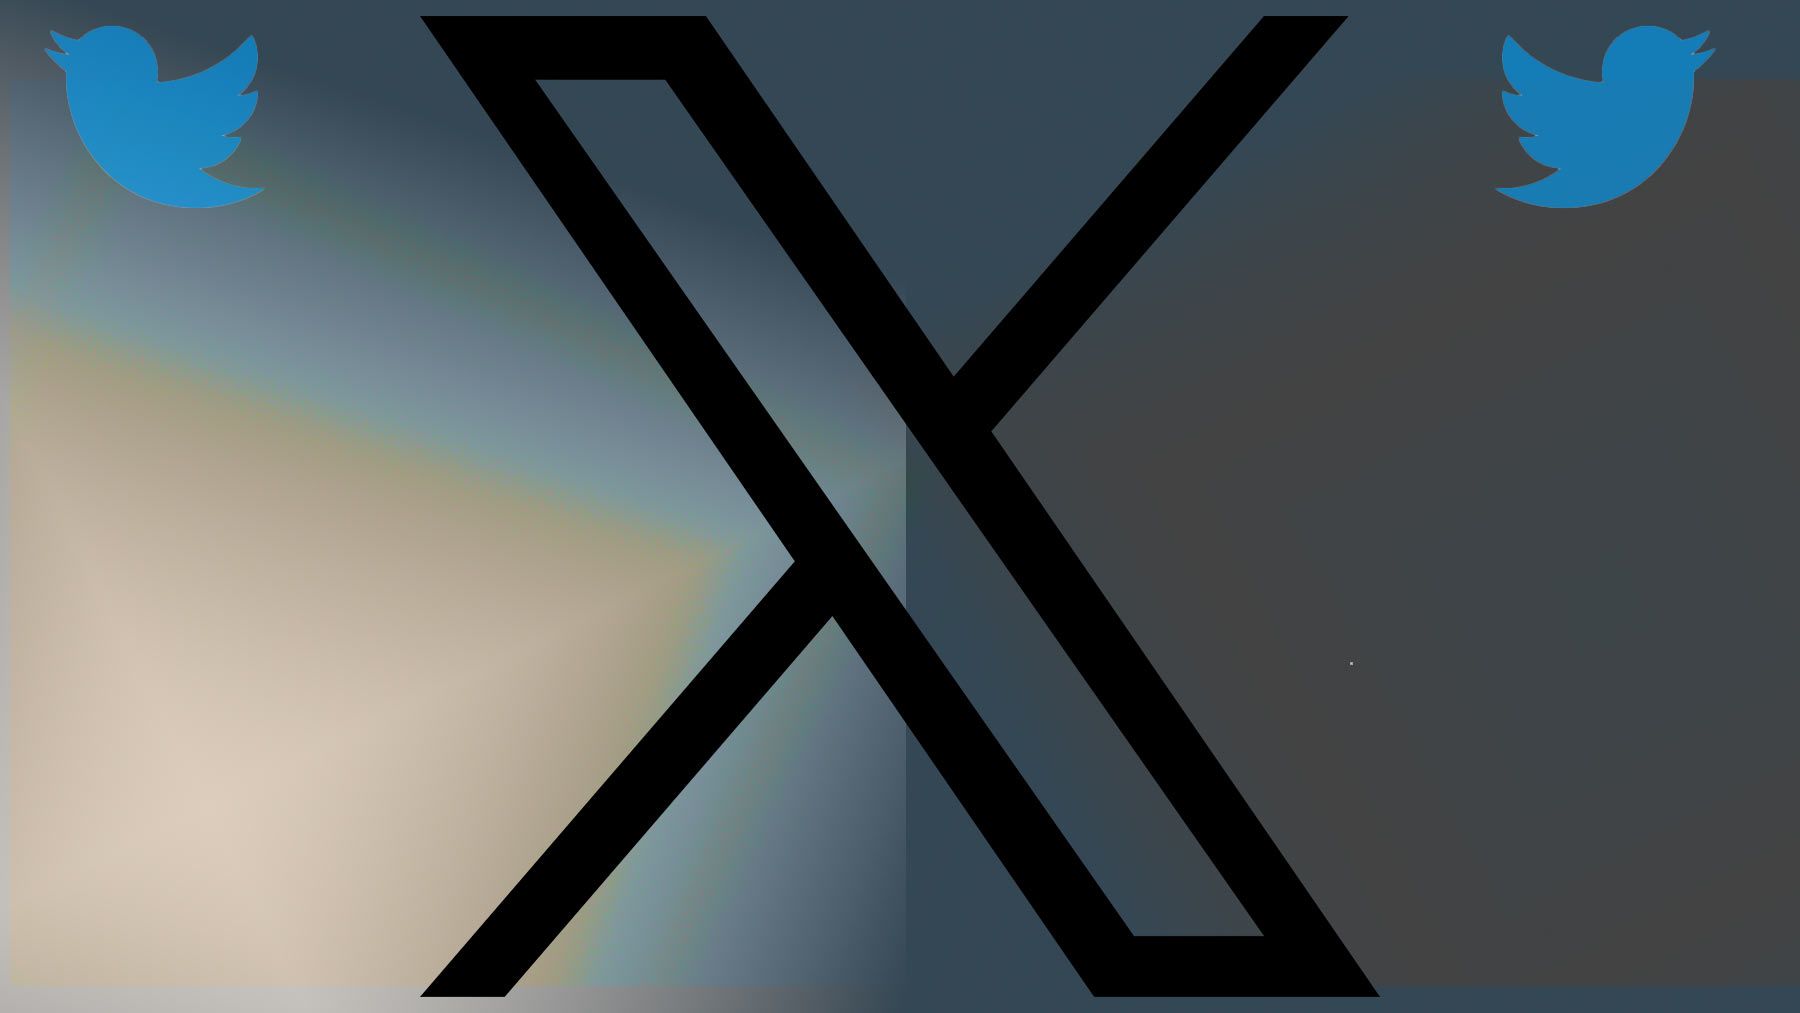 The X logo with two Twitter bird logos against a multicolor background.